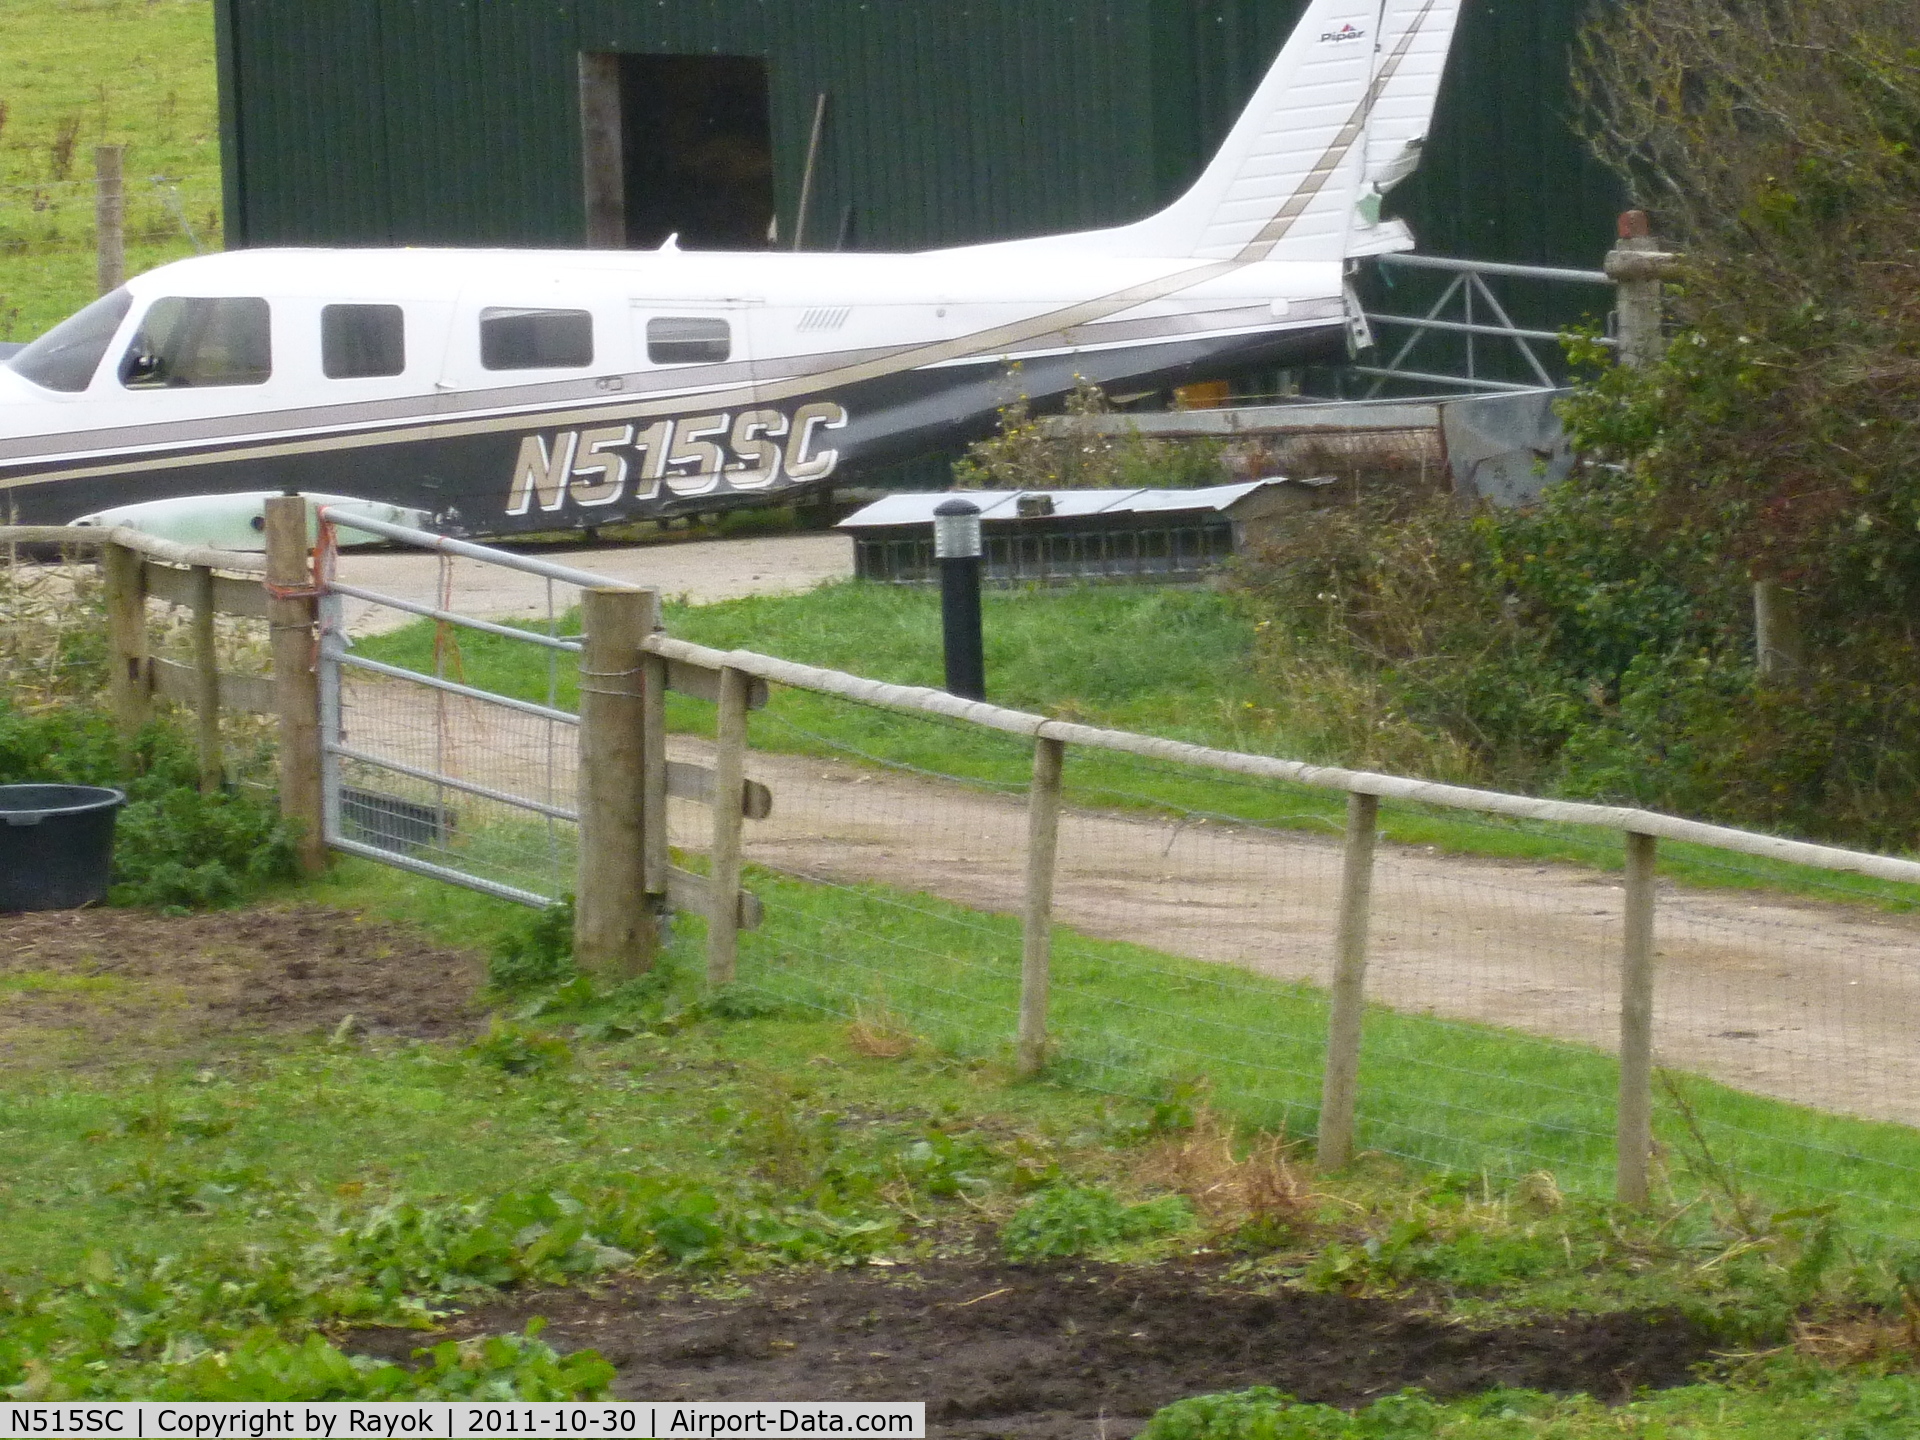 N515SC, 2003 Piper PA-32R-301T Turbo Saratoga C/N 3257315, in a farmyard at 51.539302, -2.881769 Mead Ln
Goldcliff, Newport, NP18 2, Wales, UK